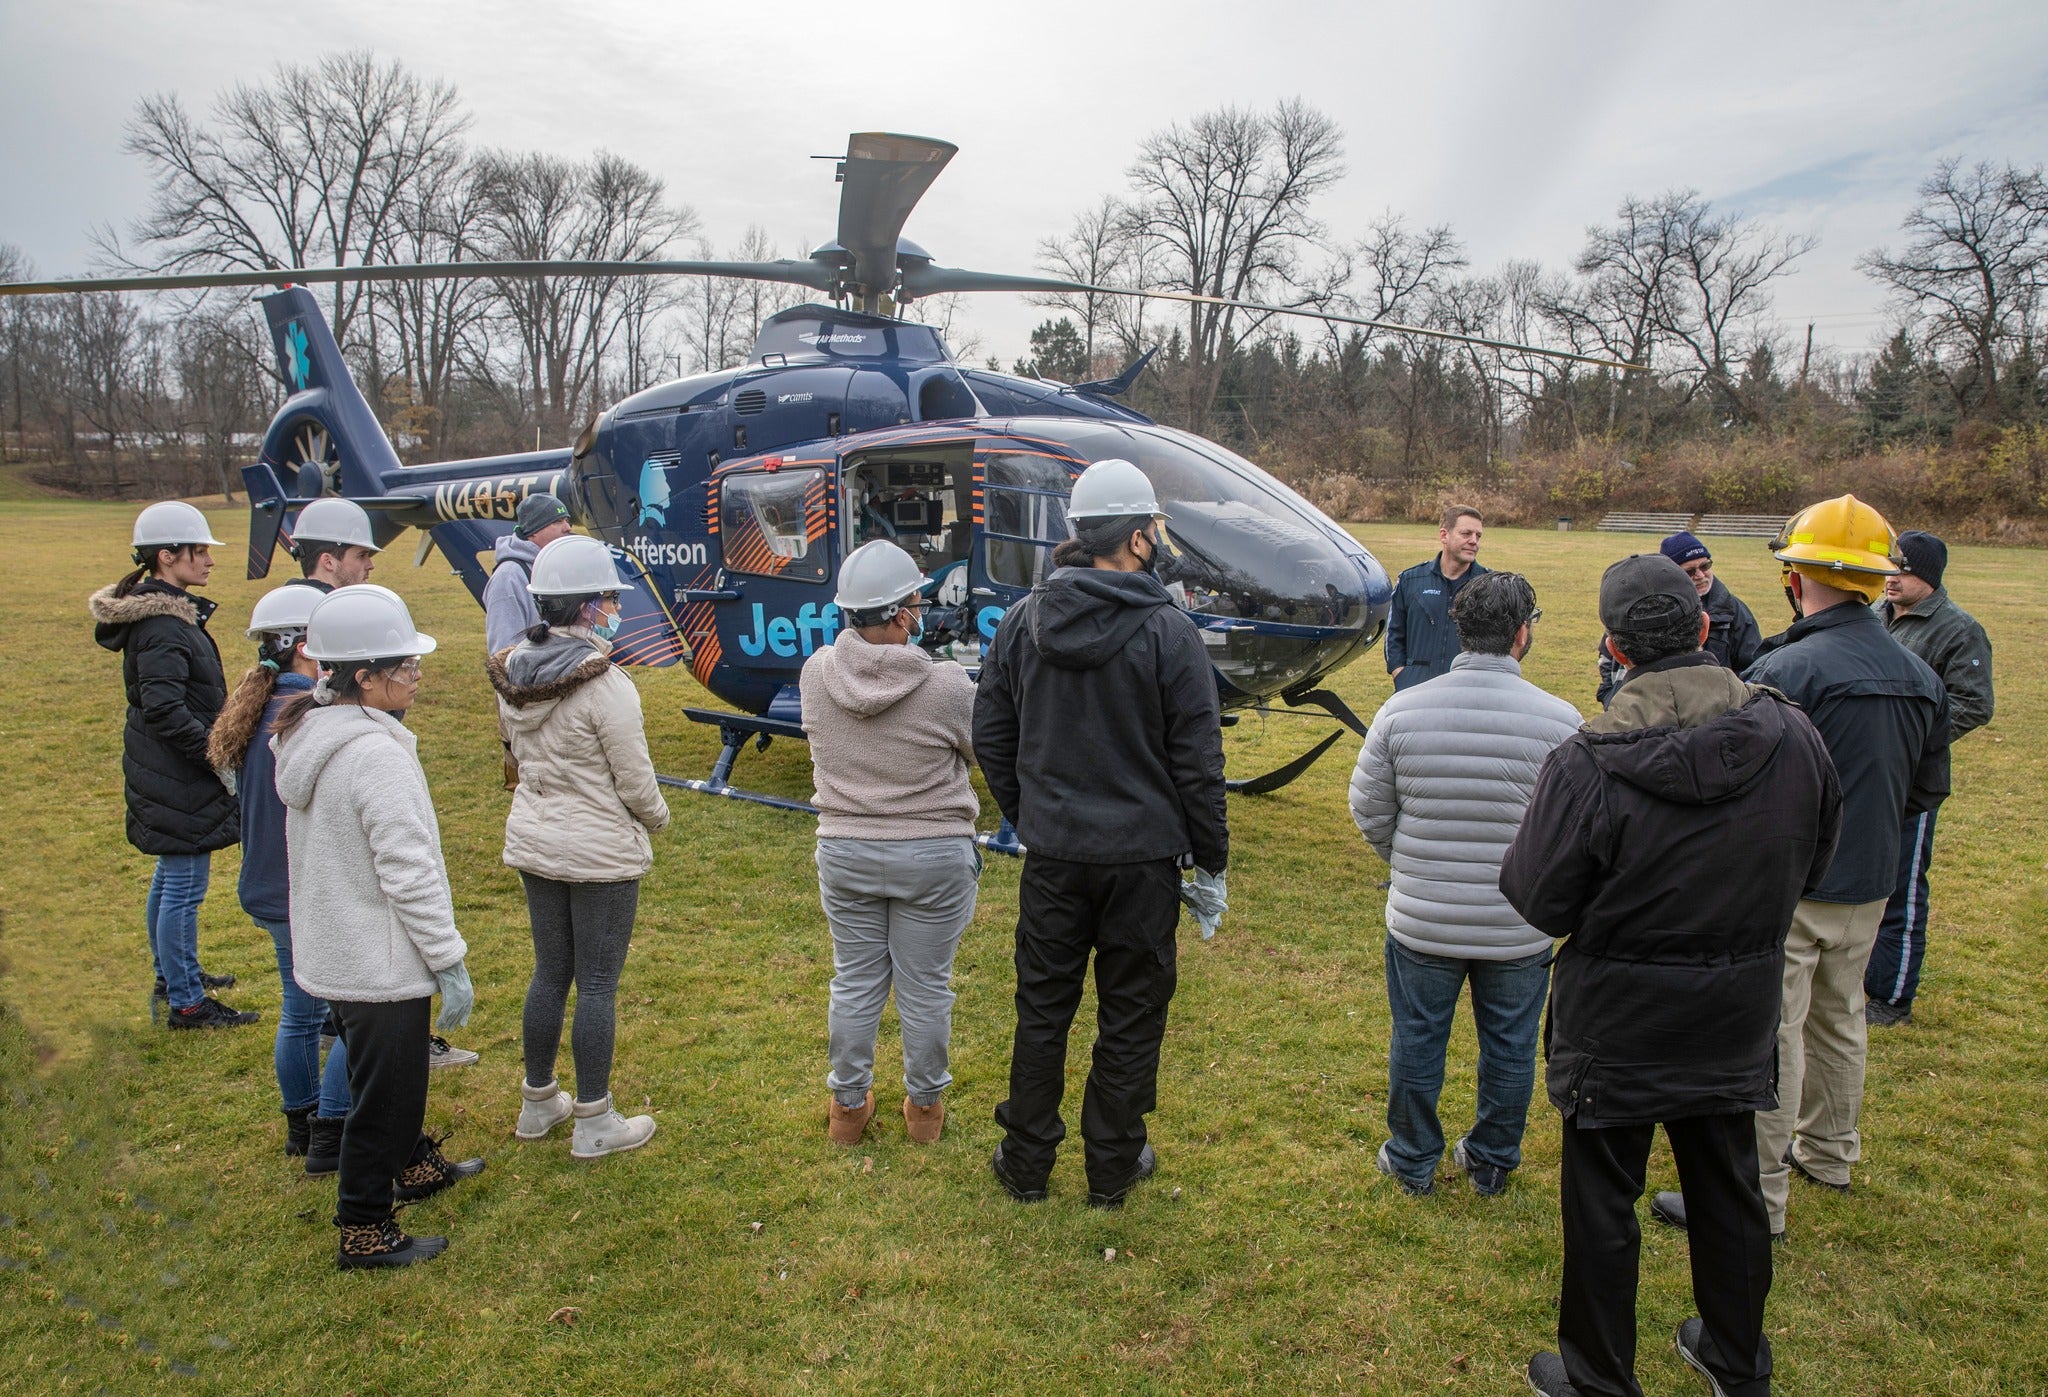 EMS-100 students listen and ask questions of members of the JeffSTAT Air Ambulance team that brought one of JeffSTAT’s air ambulance helicopters to the College’s Marple Campus for an emergency medical services lab demonstration